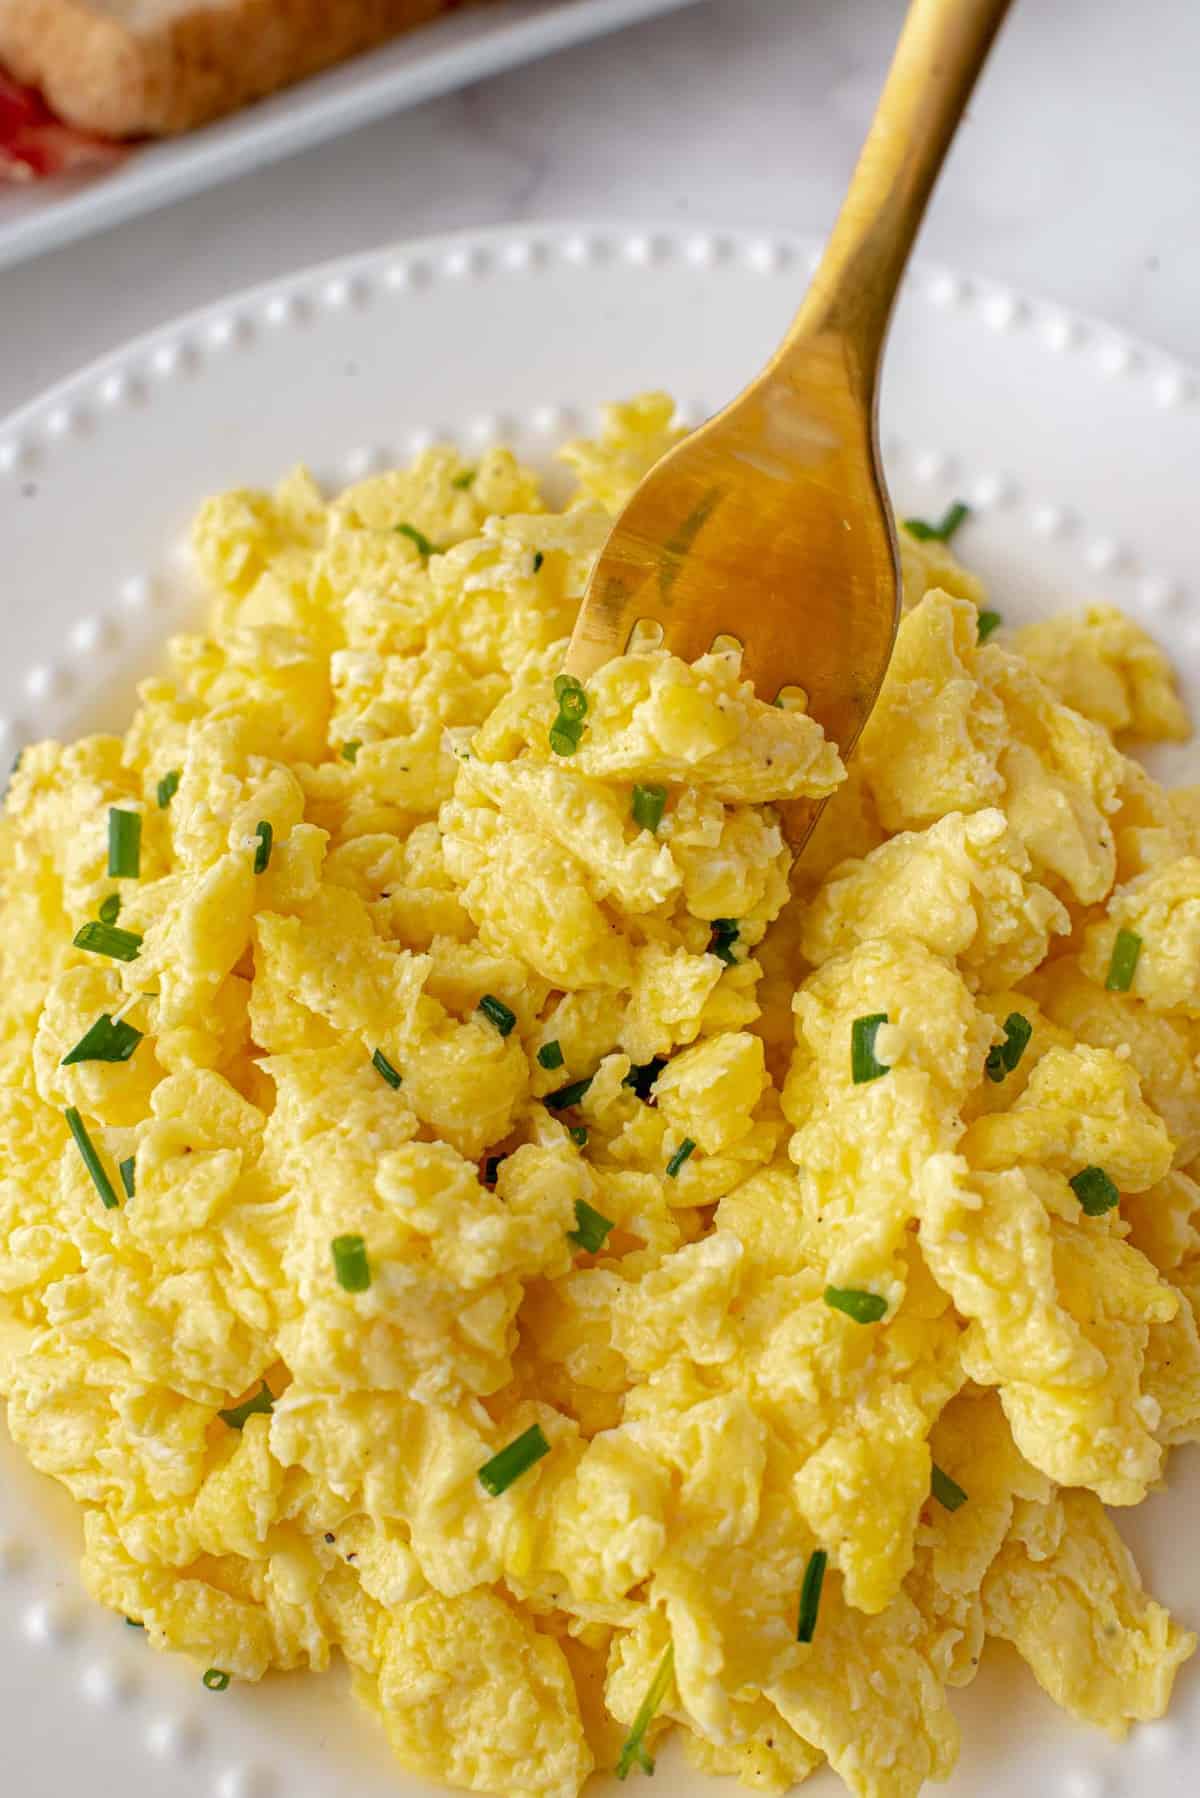 Scrambled eggs in a large white bowl.